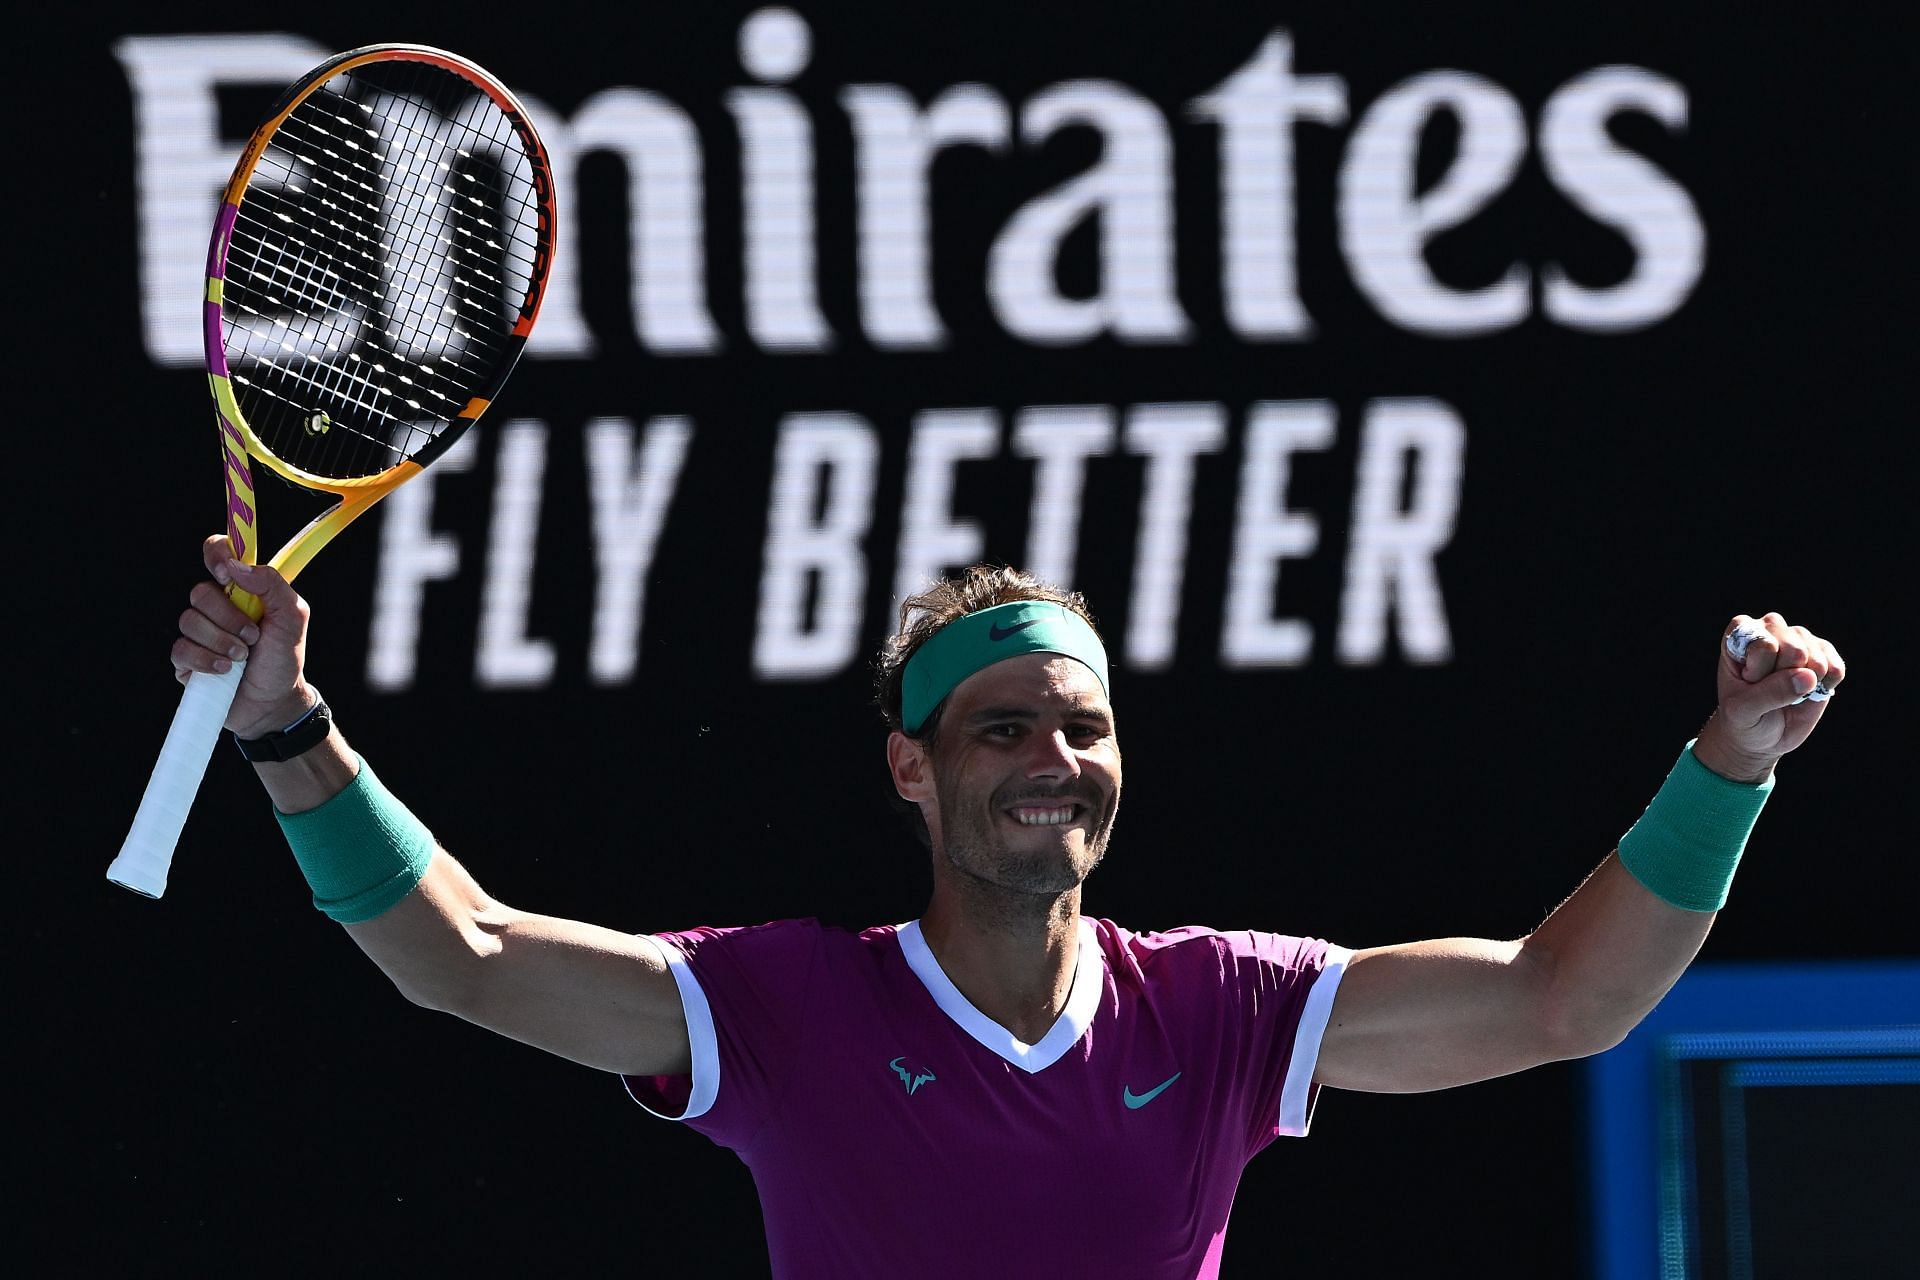 The Spaniard celebrates after winning his fourth-round match at the 2022 Australian Open